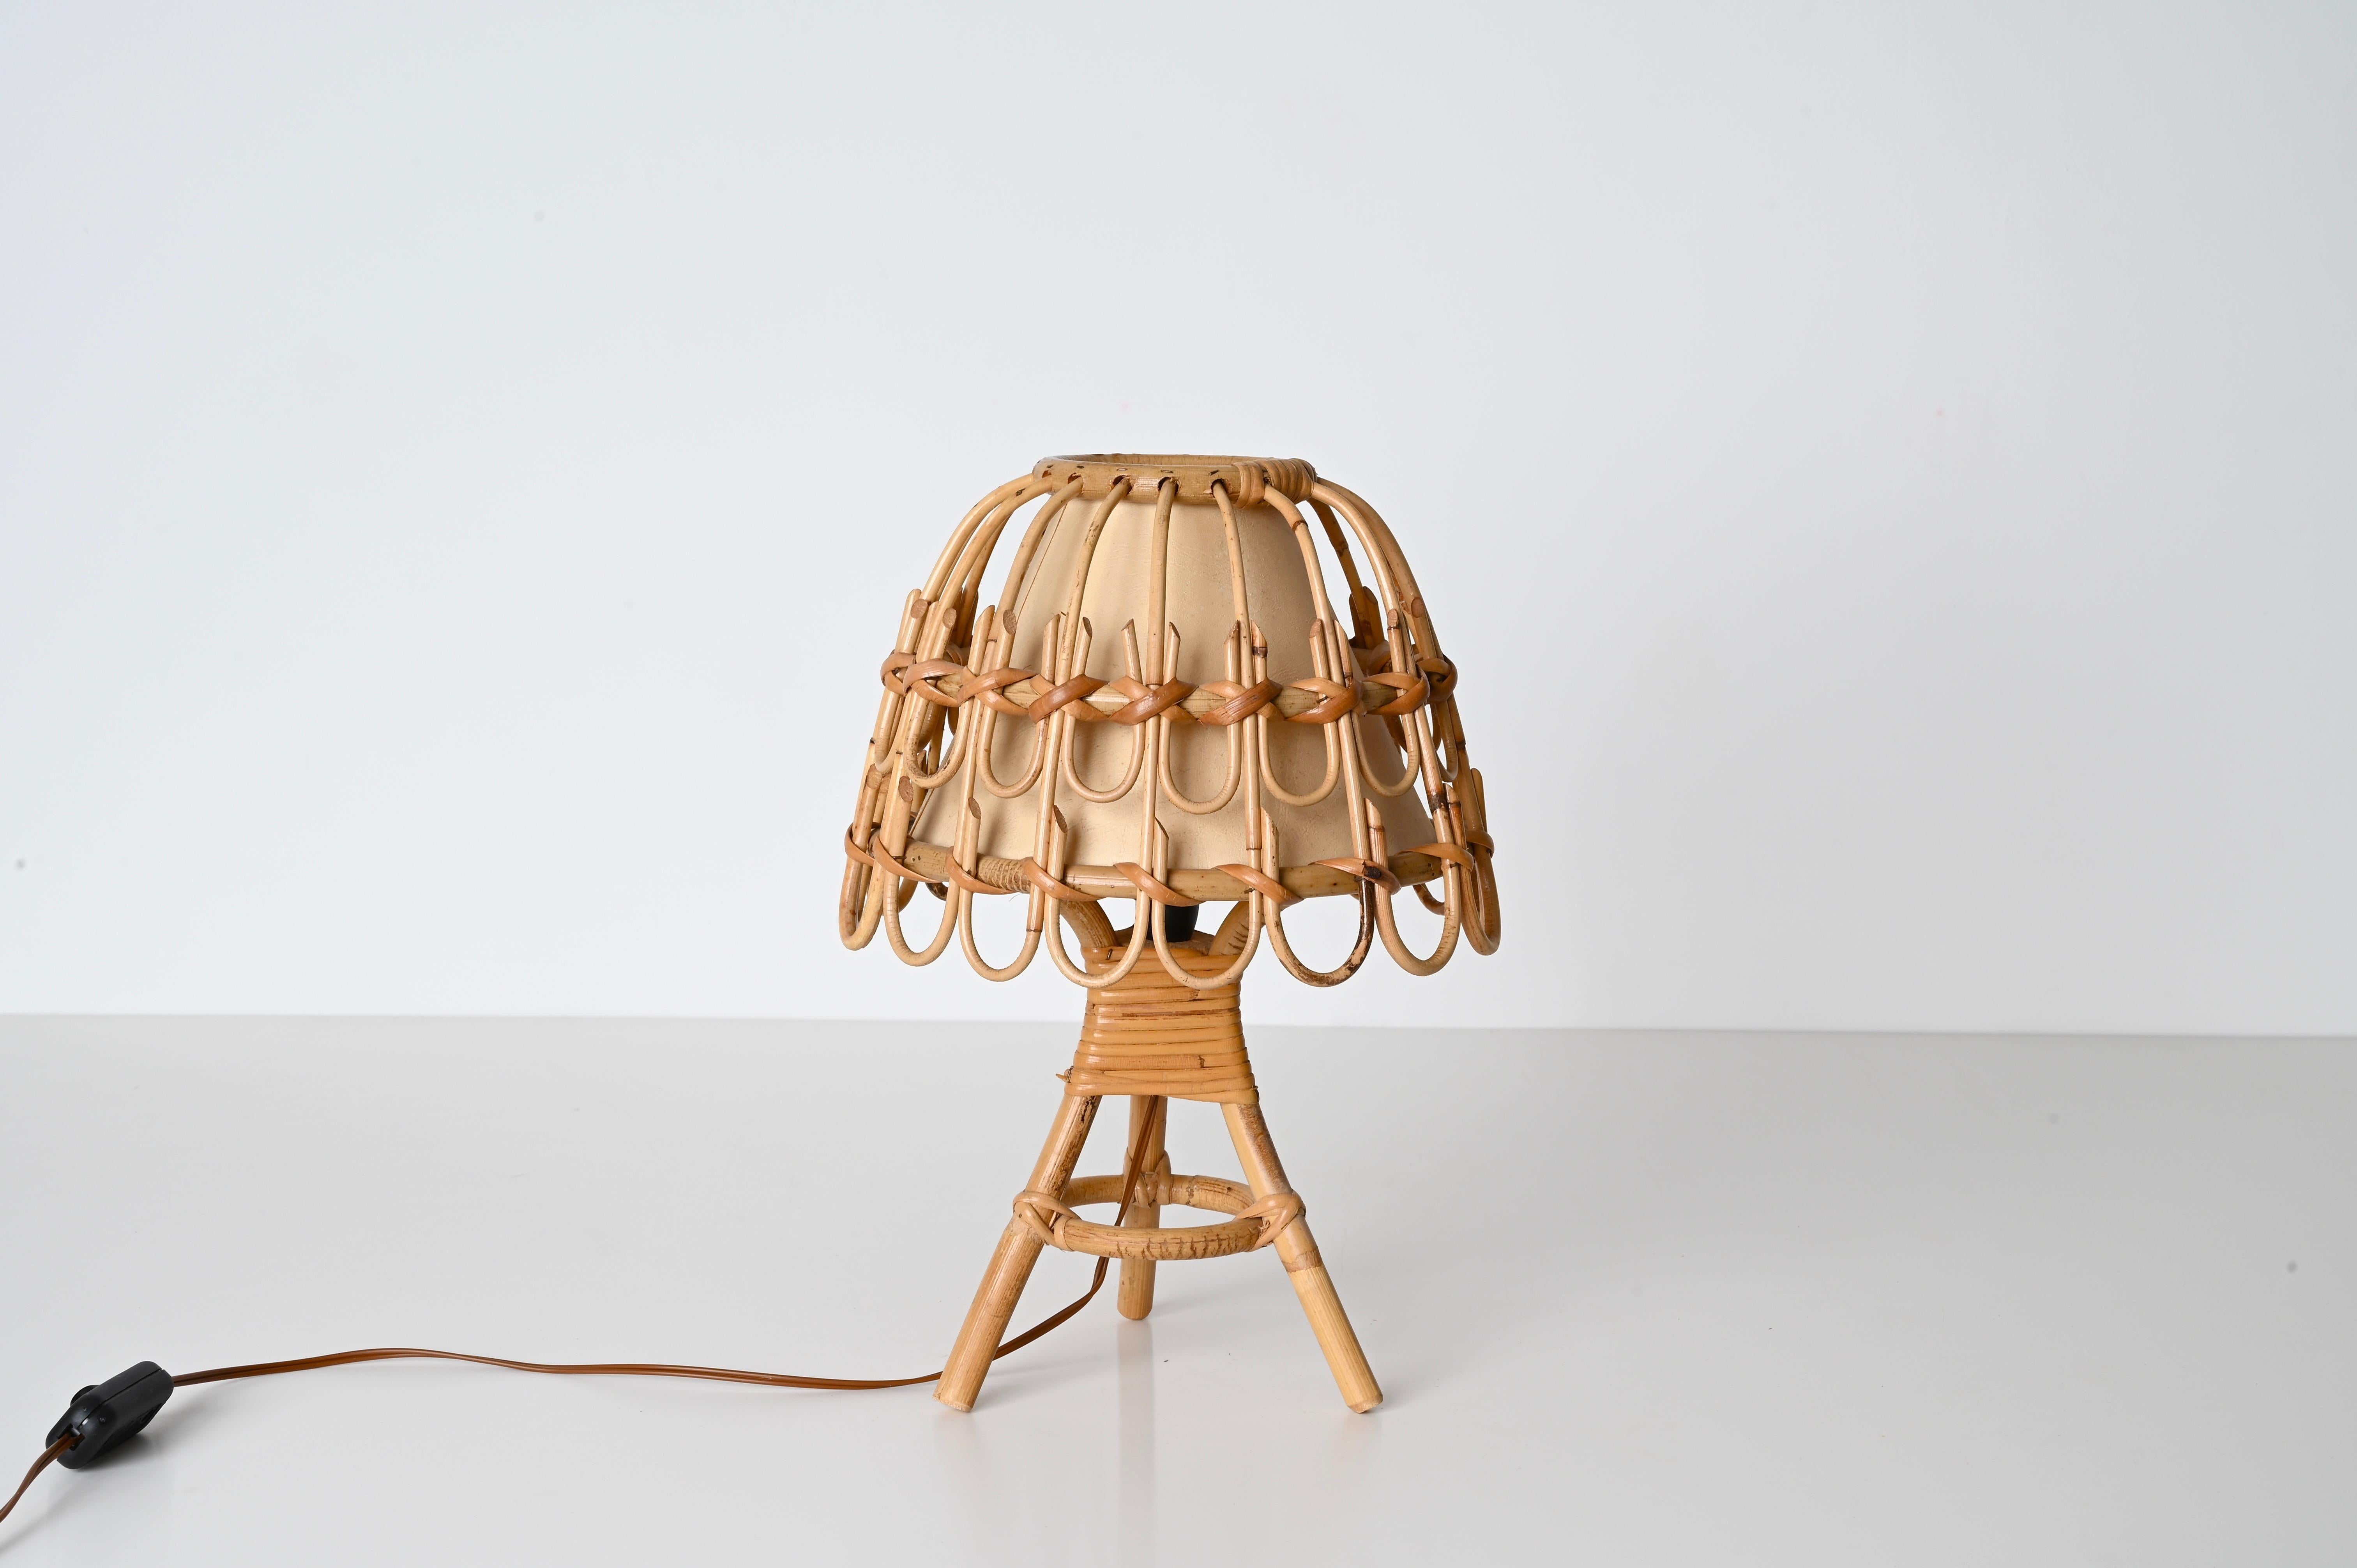 French Pair of Midcentury Table Lamps in Rattan and Wicker, Louis Sognot, France, 1960s